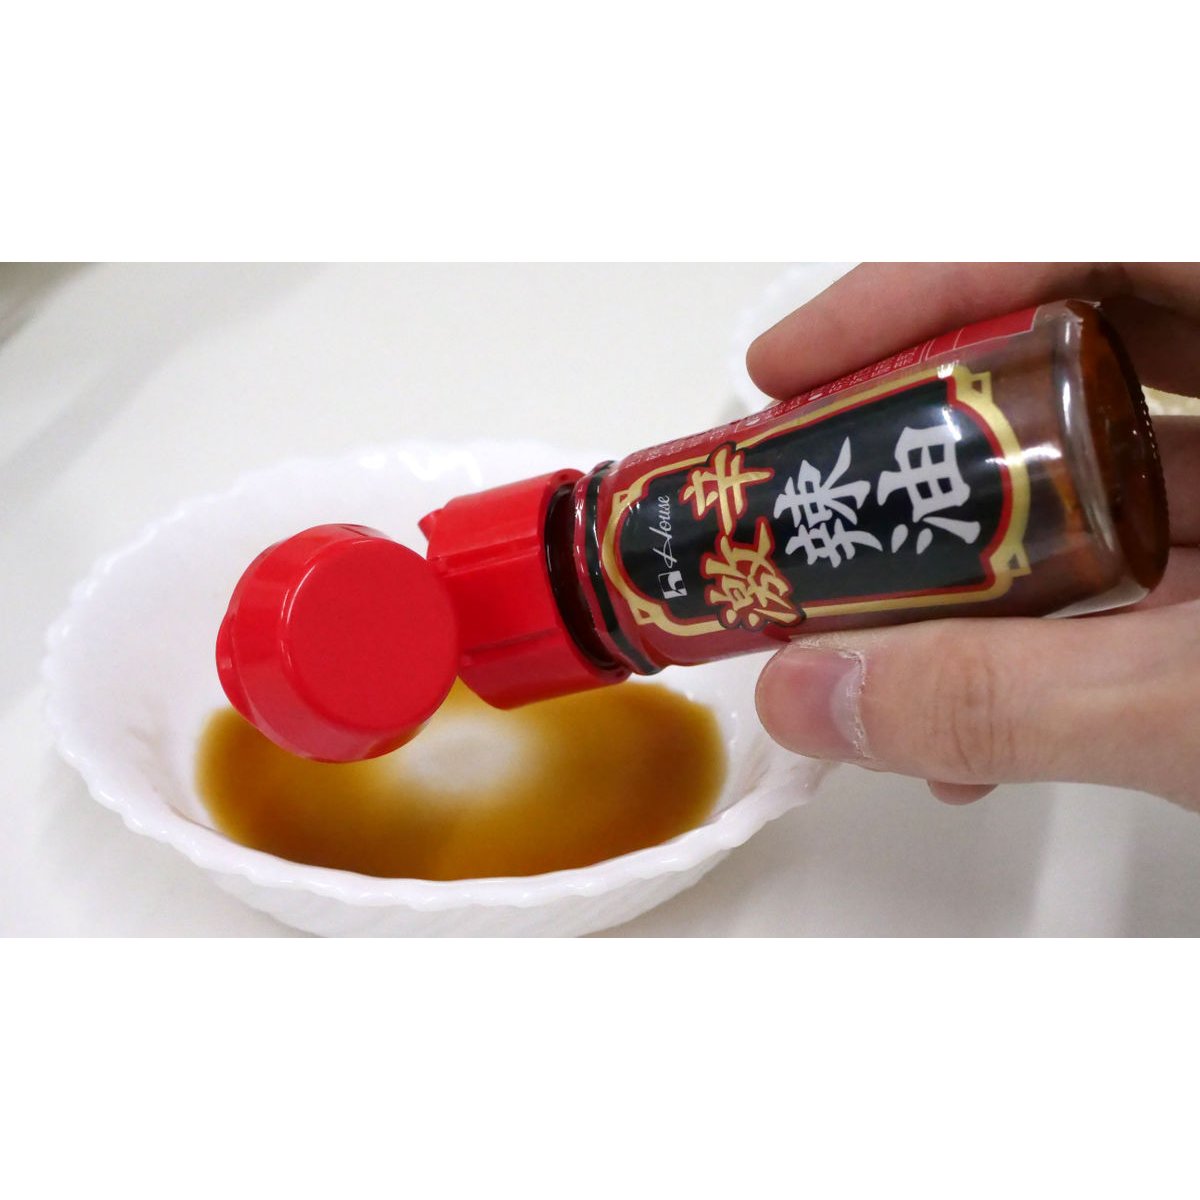 House Extra Hot Rayu Spicy Chili Sesame Oil Sauce 31g